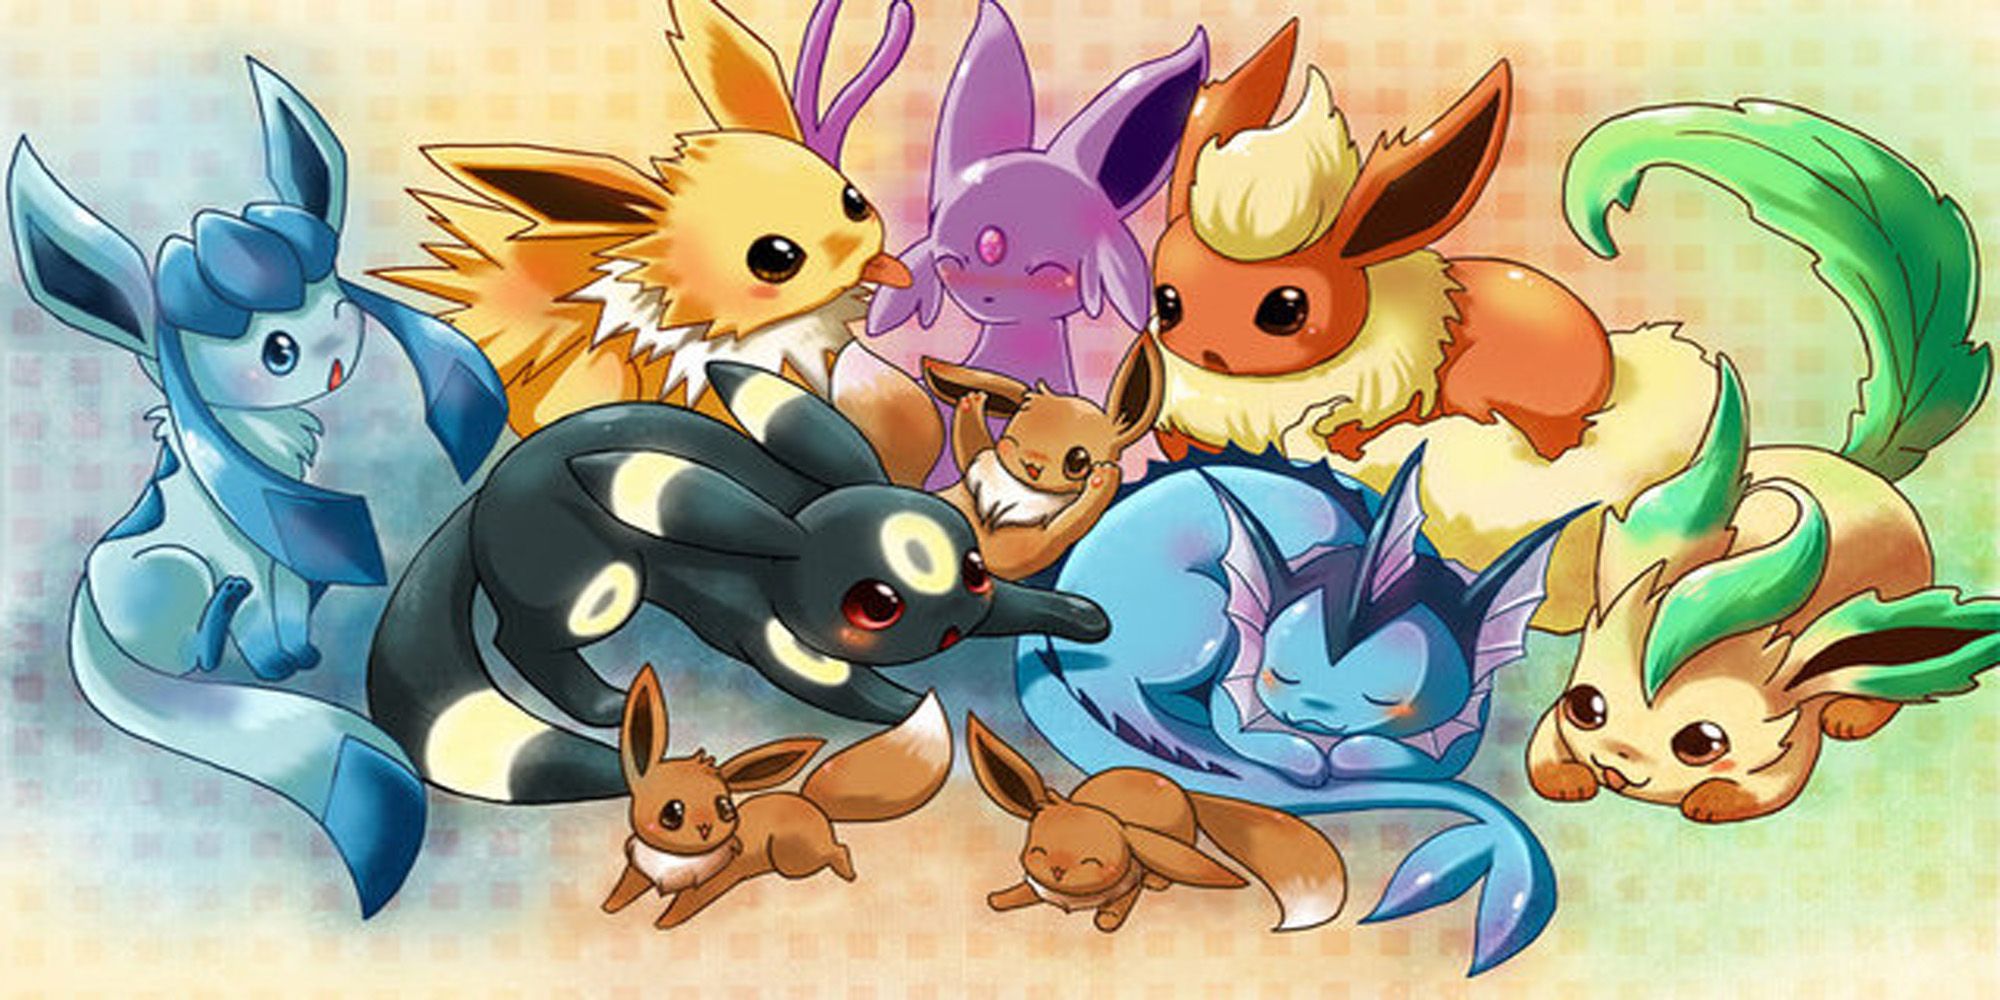 25 False Facts About The Pokémon Games That Everyone Believed